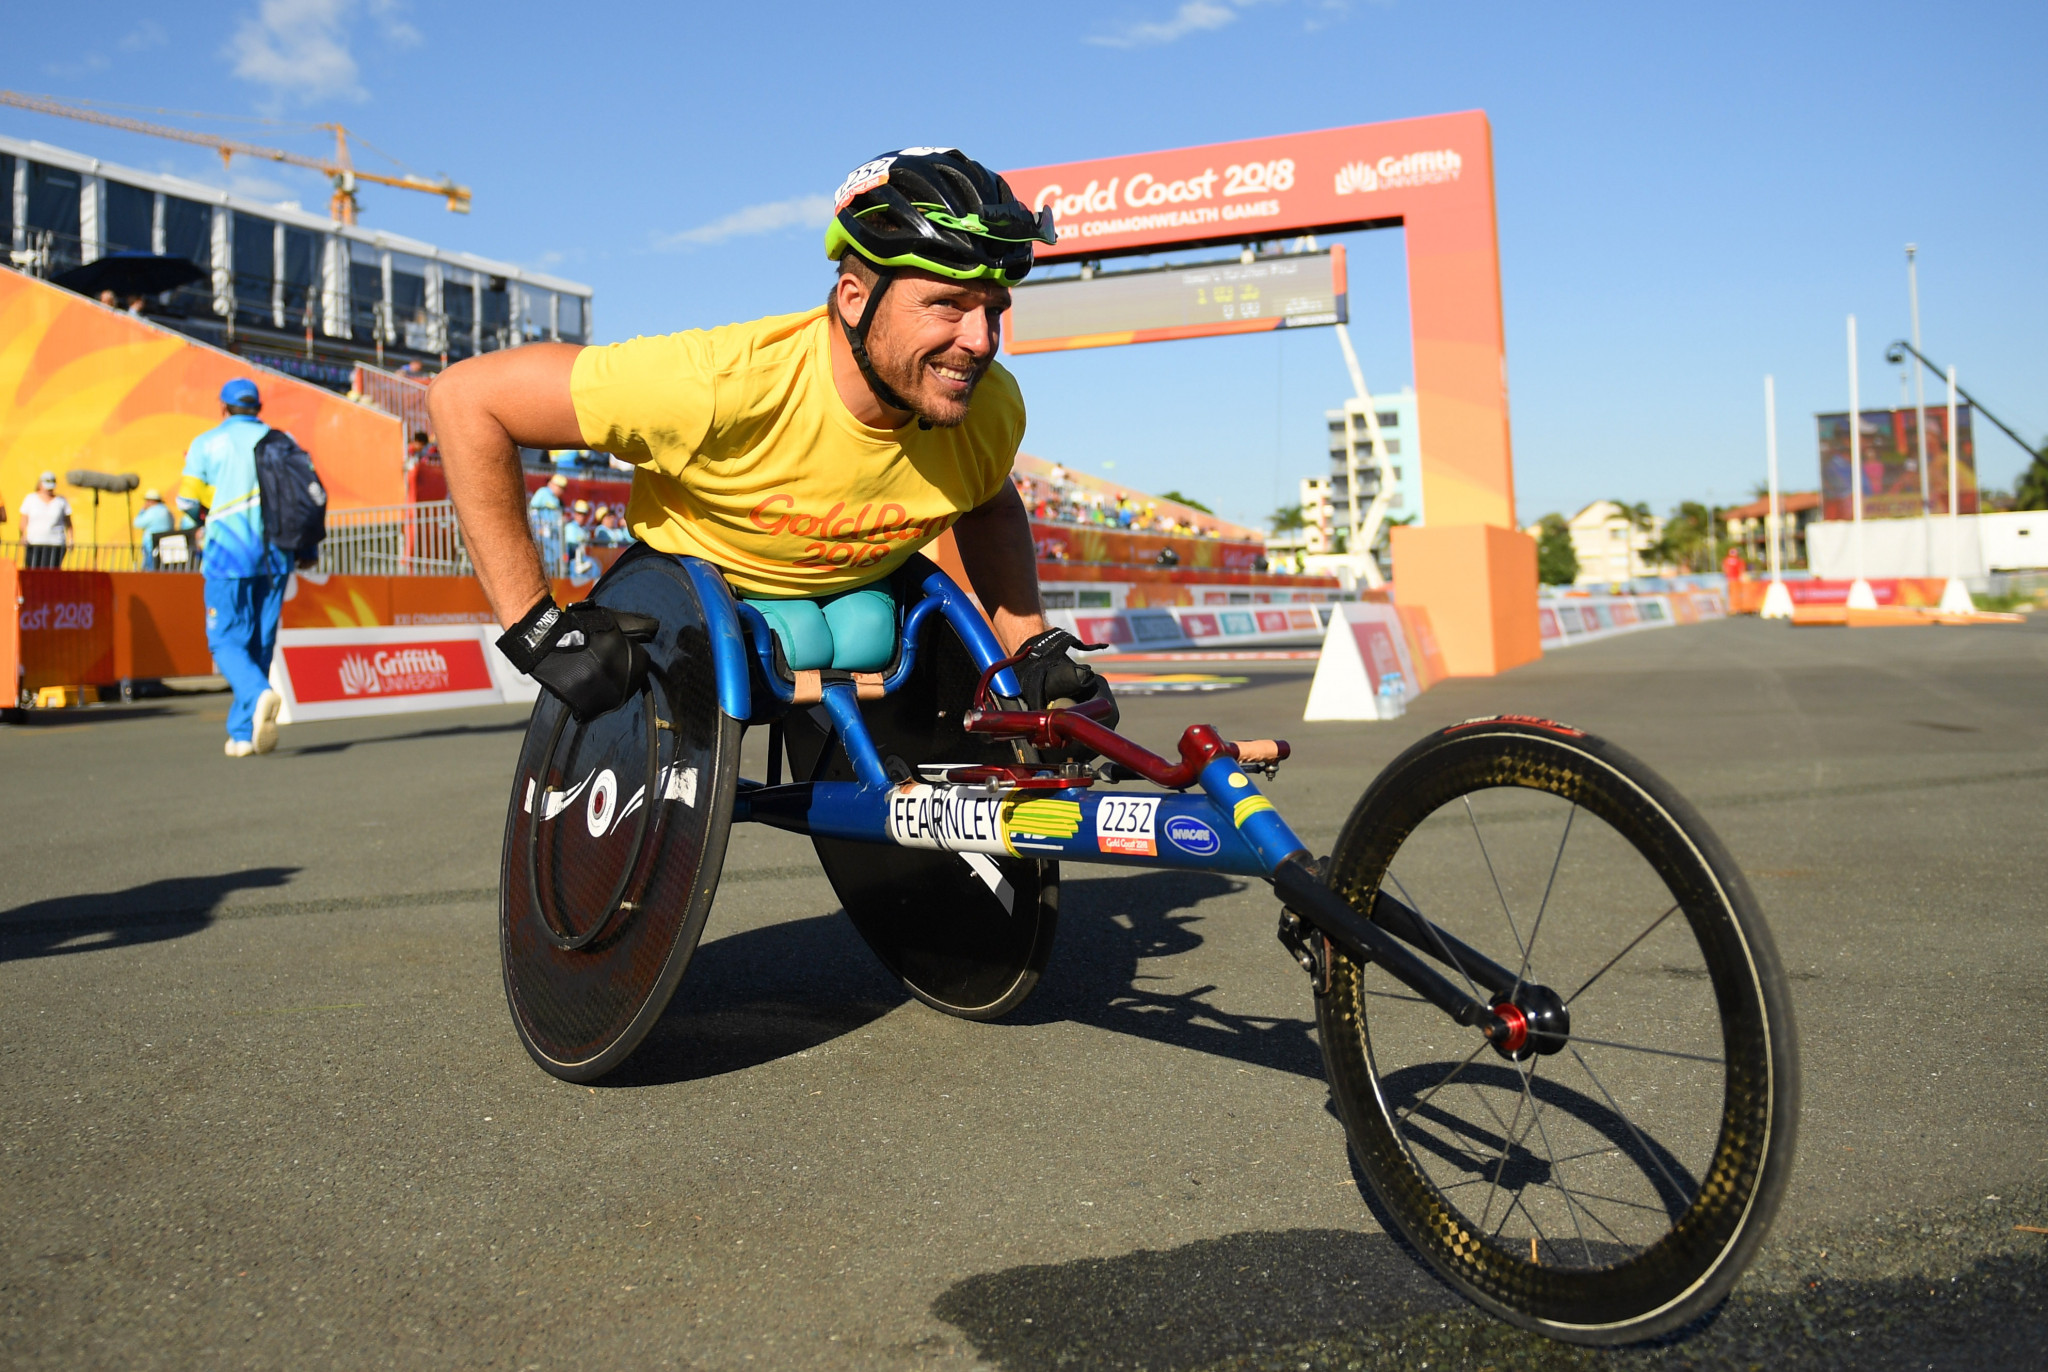 Three-time Paralmypic champion Kurt Fearnley was among the Australian sport stars recognised ©Getty Images